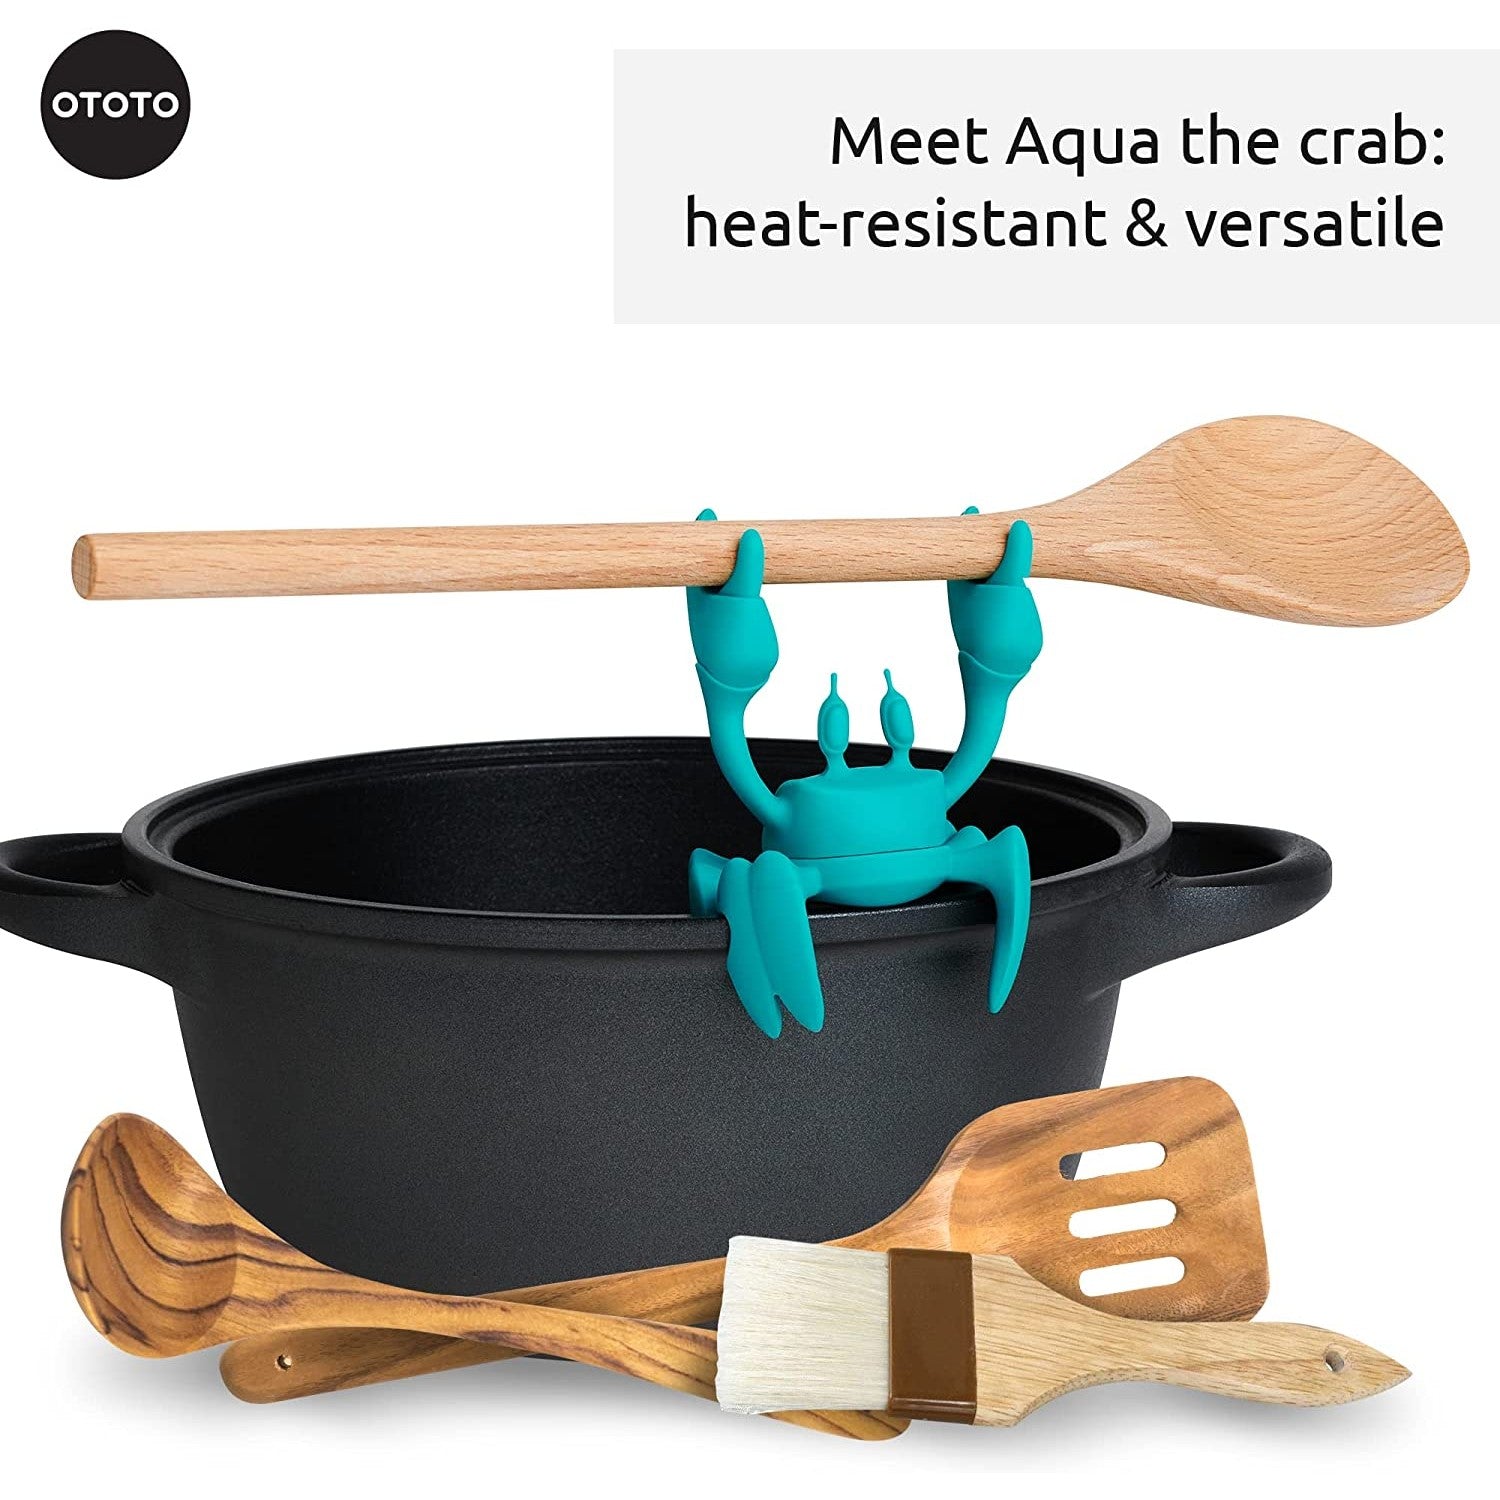 Add convenience and character to your kitchen with Aqua the Crab